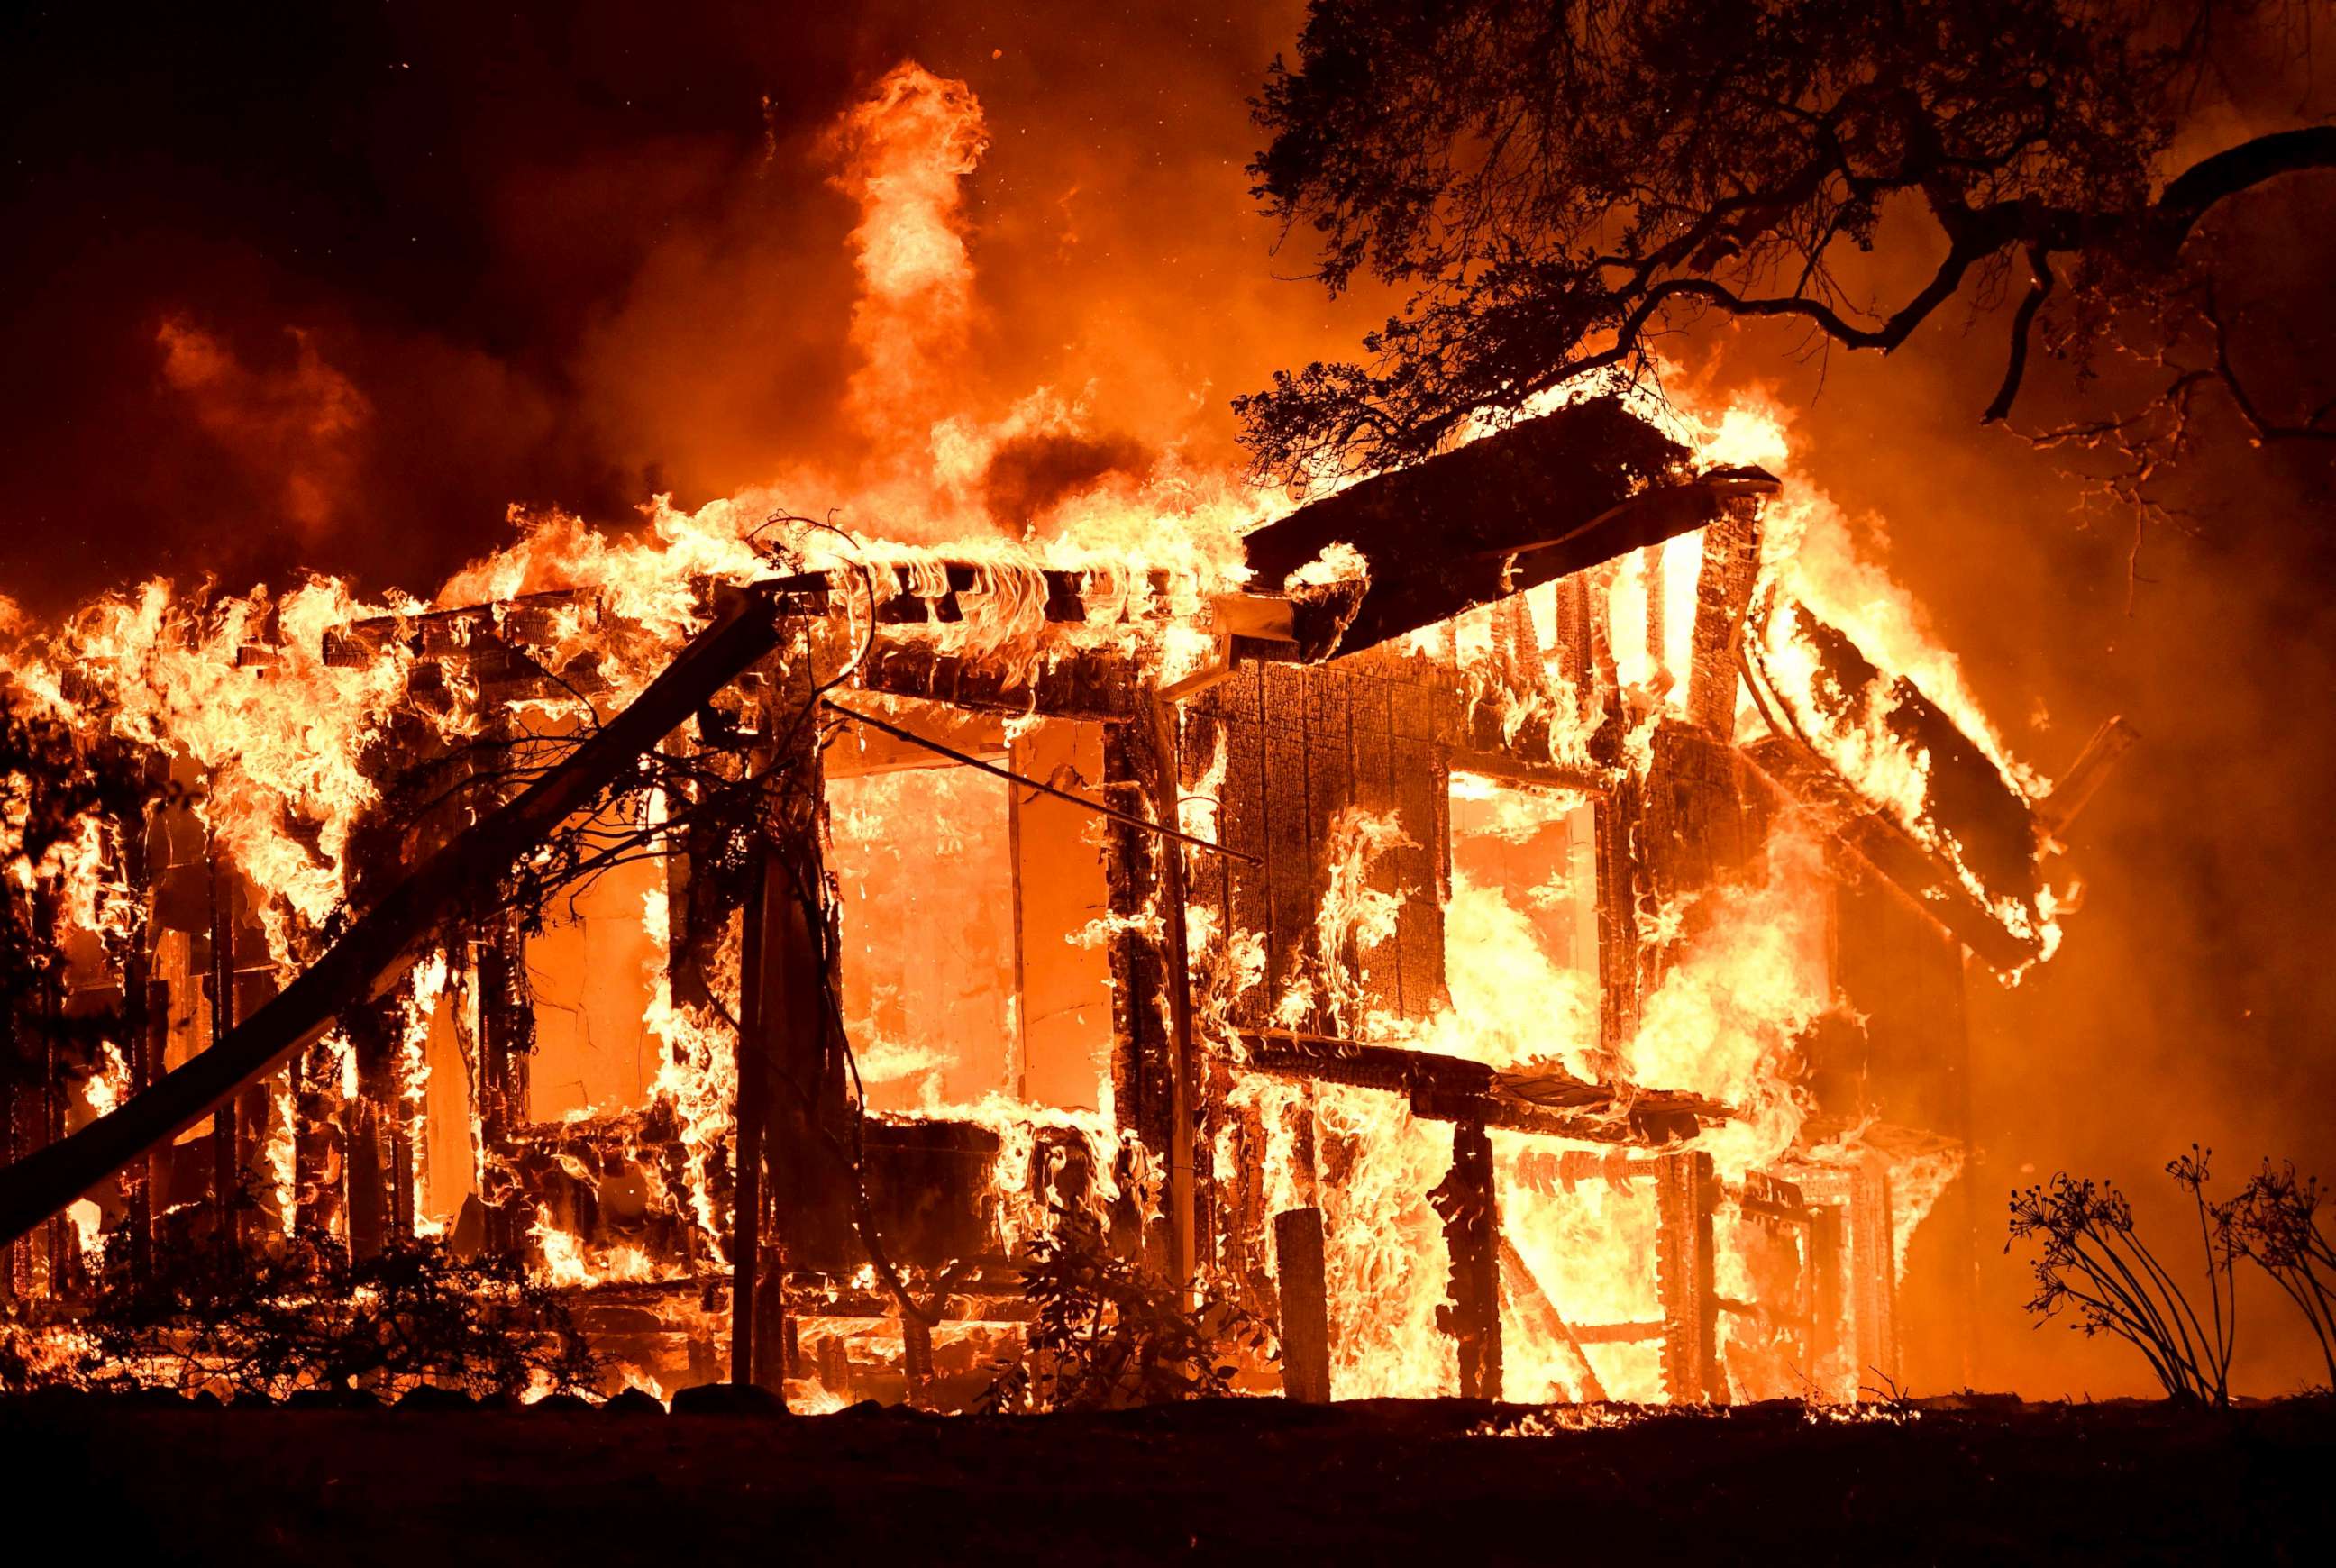 PHOTO: Flames ravage a home in the Napa wine region in California, Oct. 9, 2017, as multiple wind-driven fires continue to whip through the region.